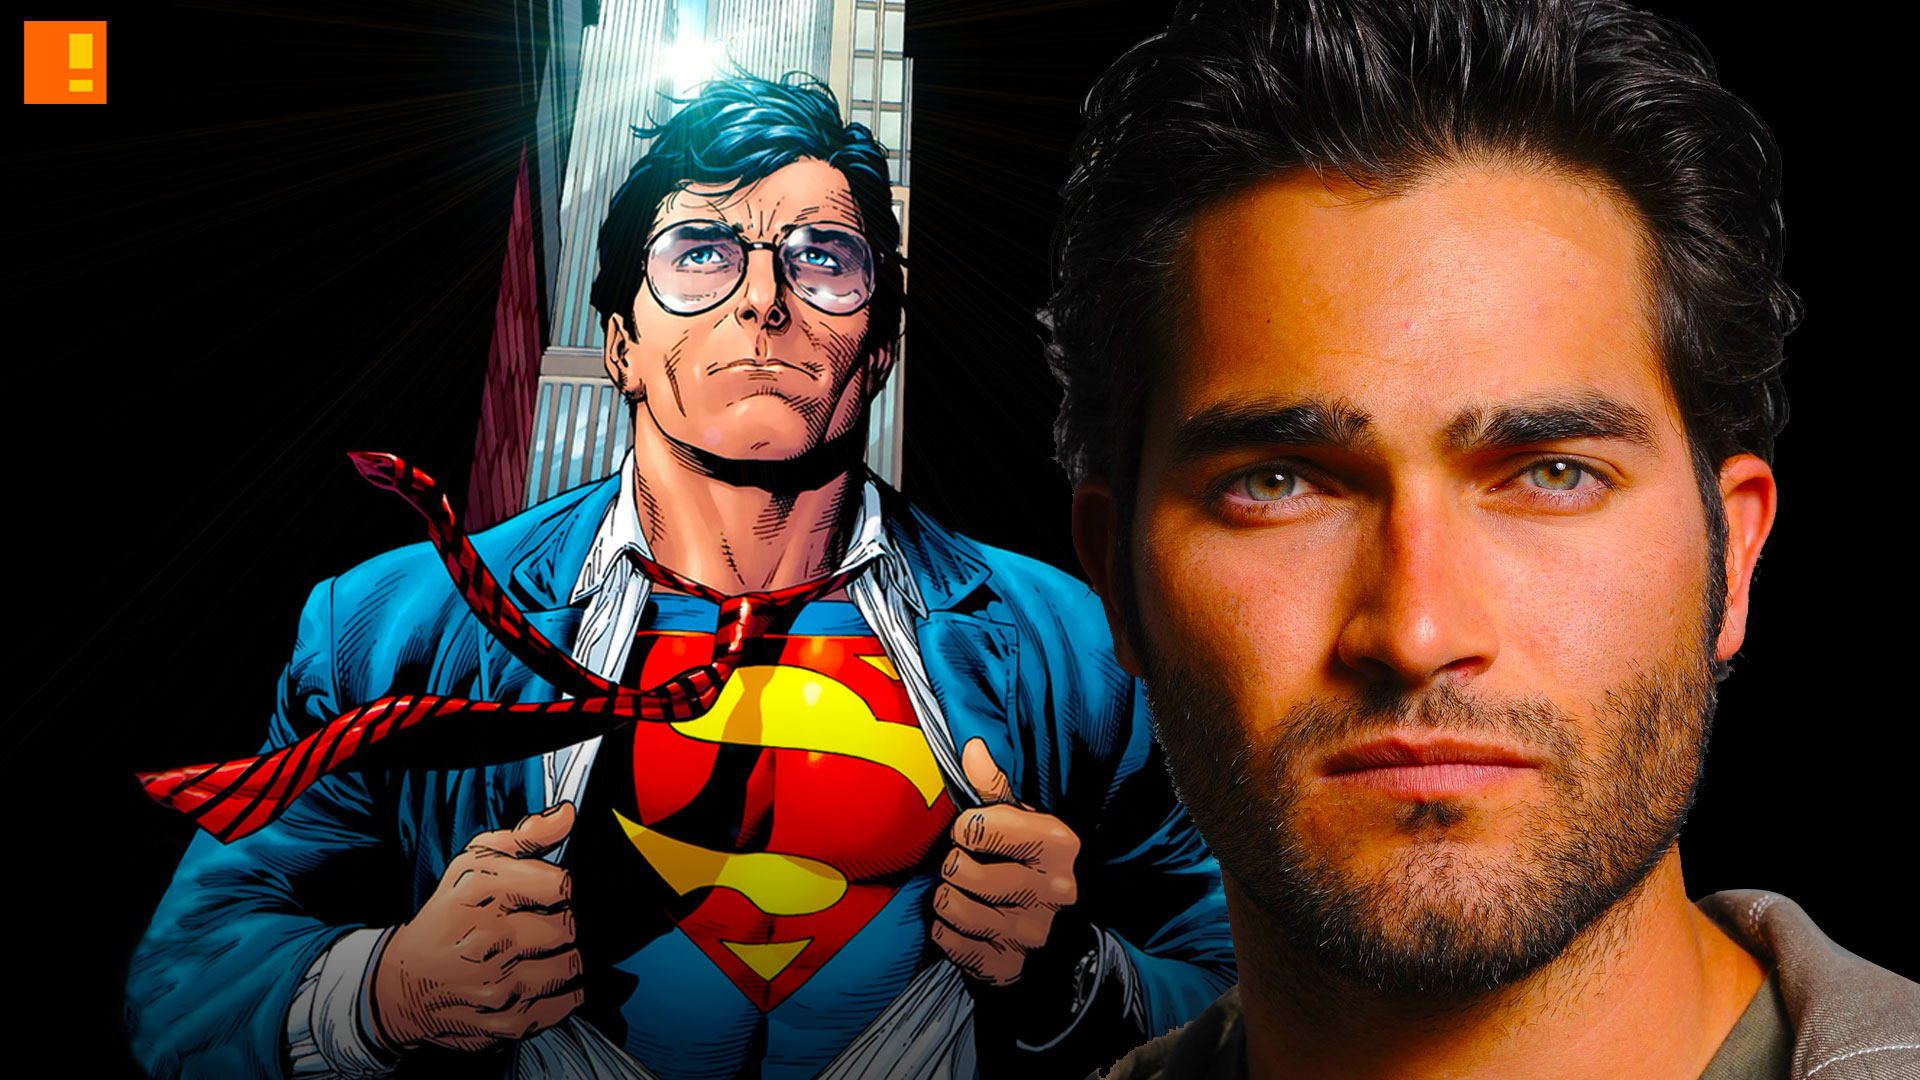 TYLER HOECHLIN, SUPERMAN, casting , cast, supergirl, cw, cbs, the cw network, the cw, entertainment on tap, the action pixel, superman, supergirl, dc comics,